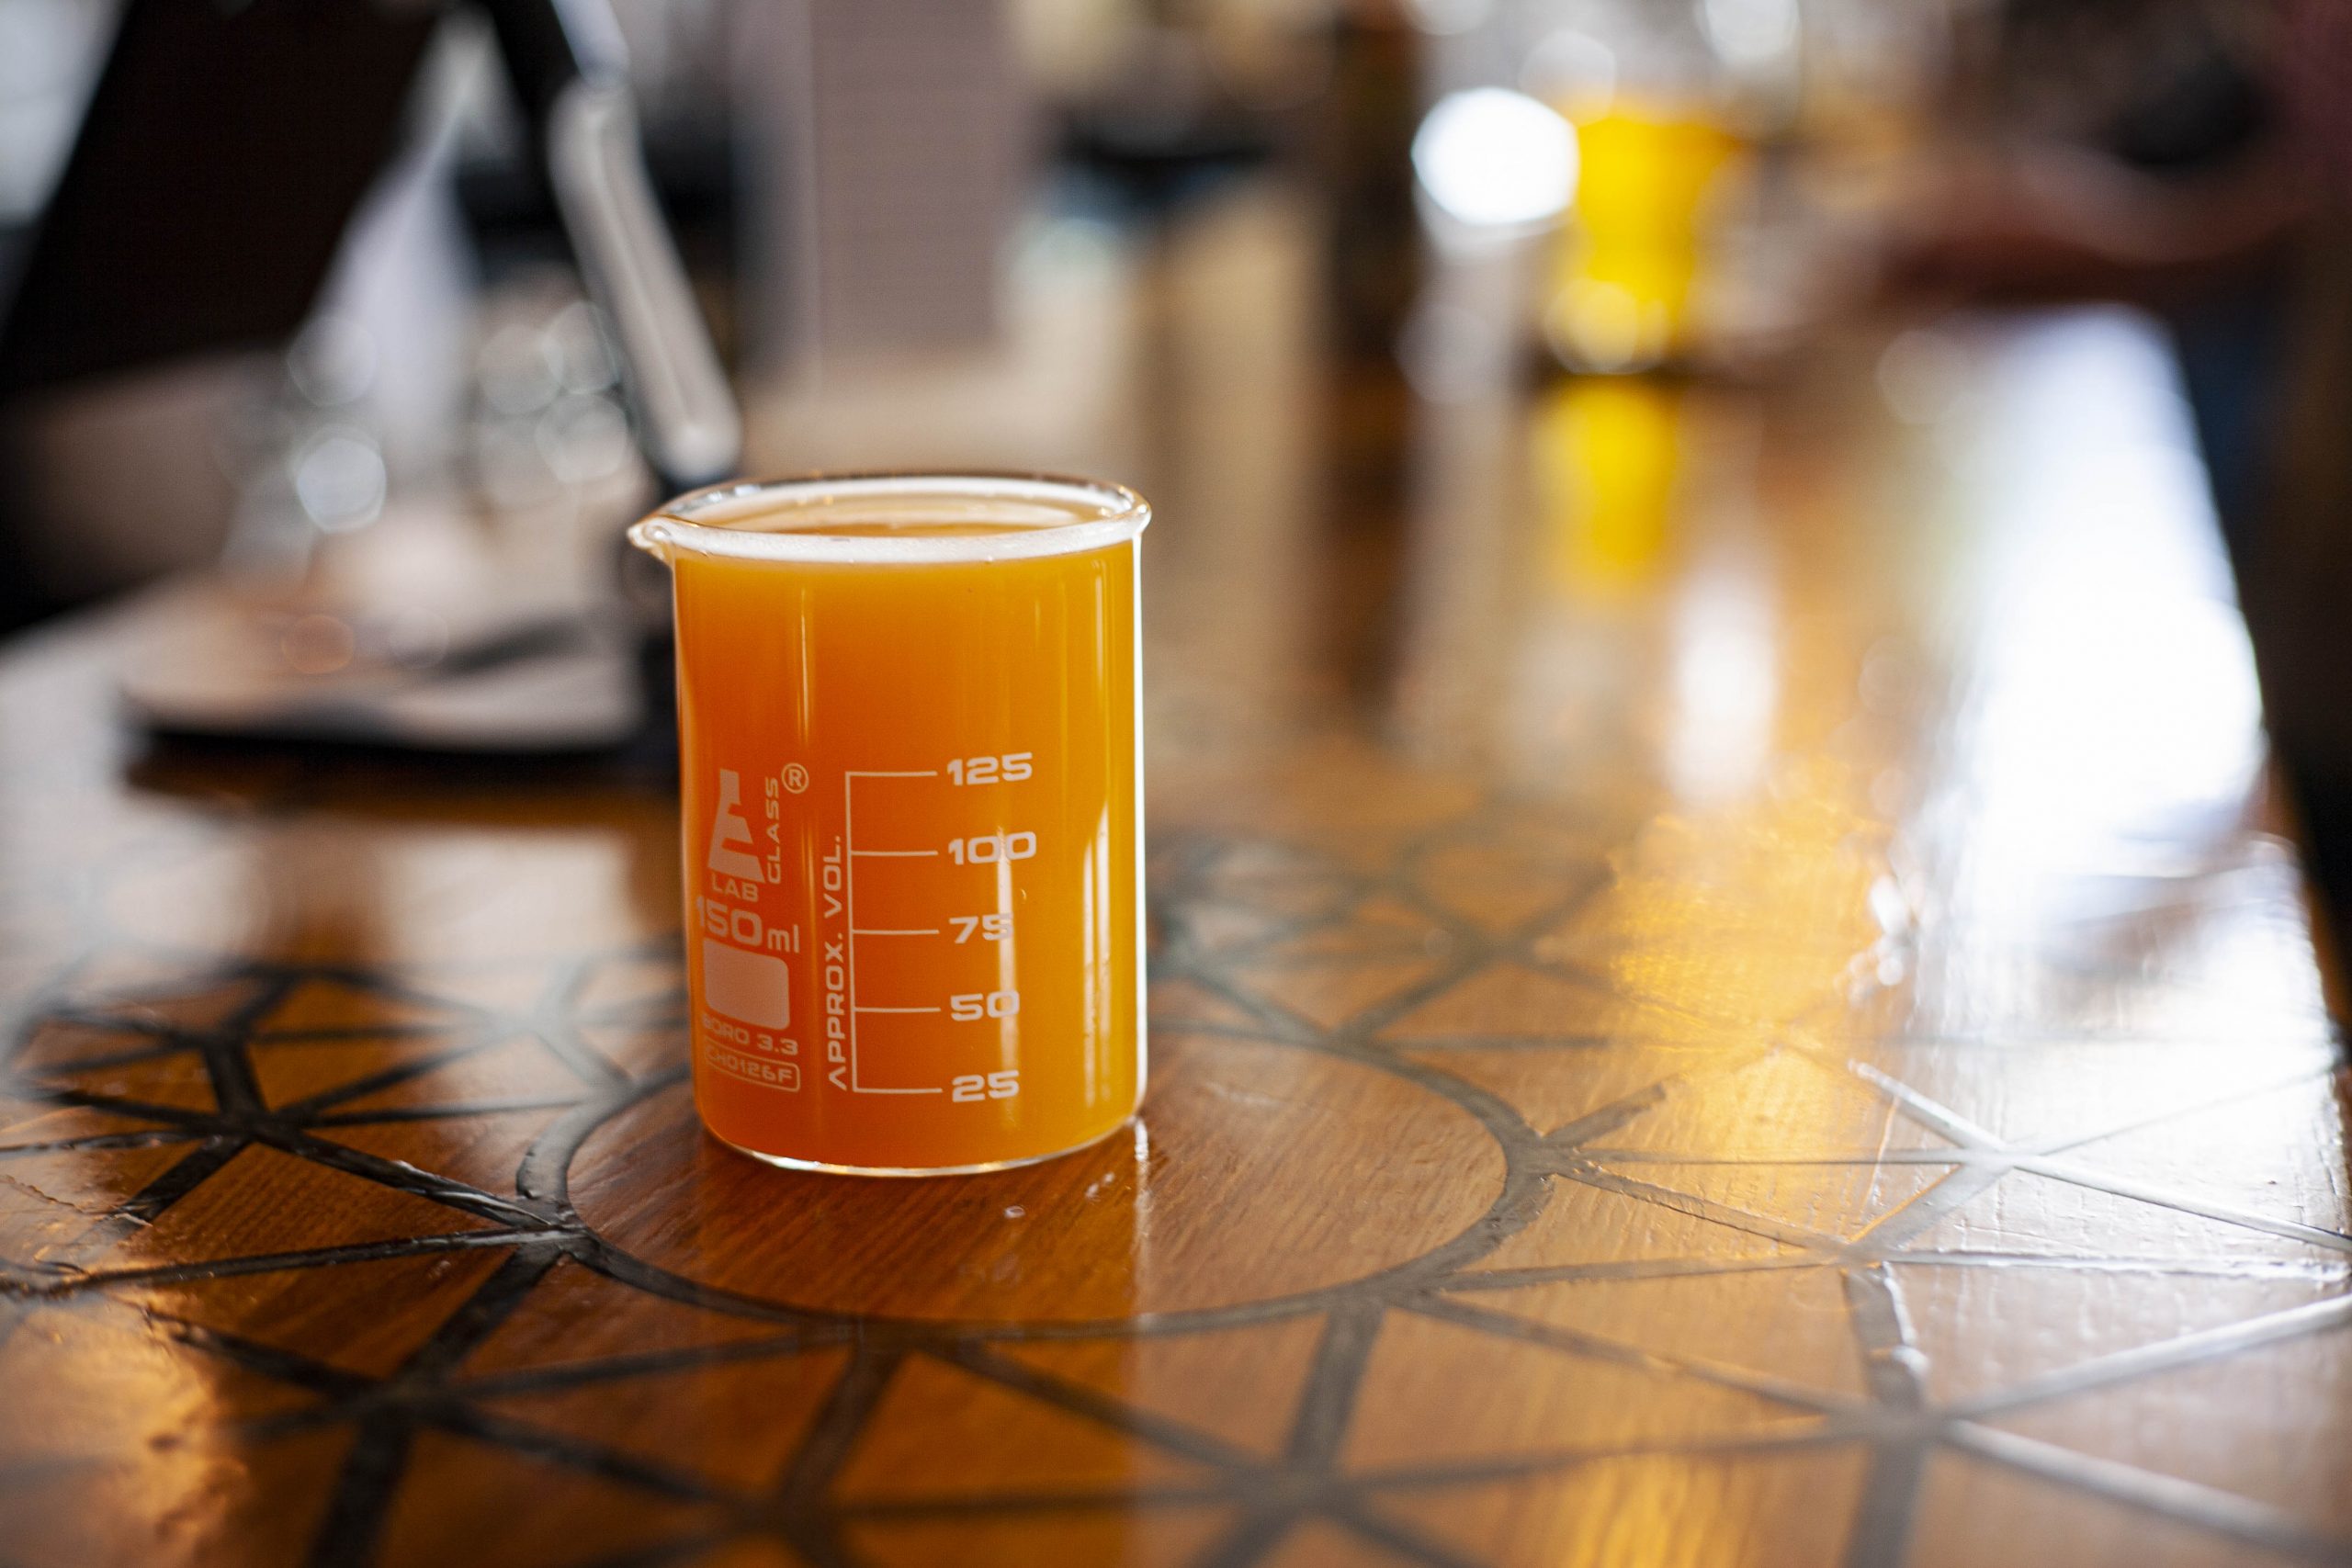 A bright orange fruit slushee beer is served in a four ounce scientific beaker